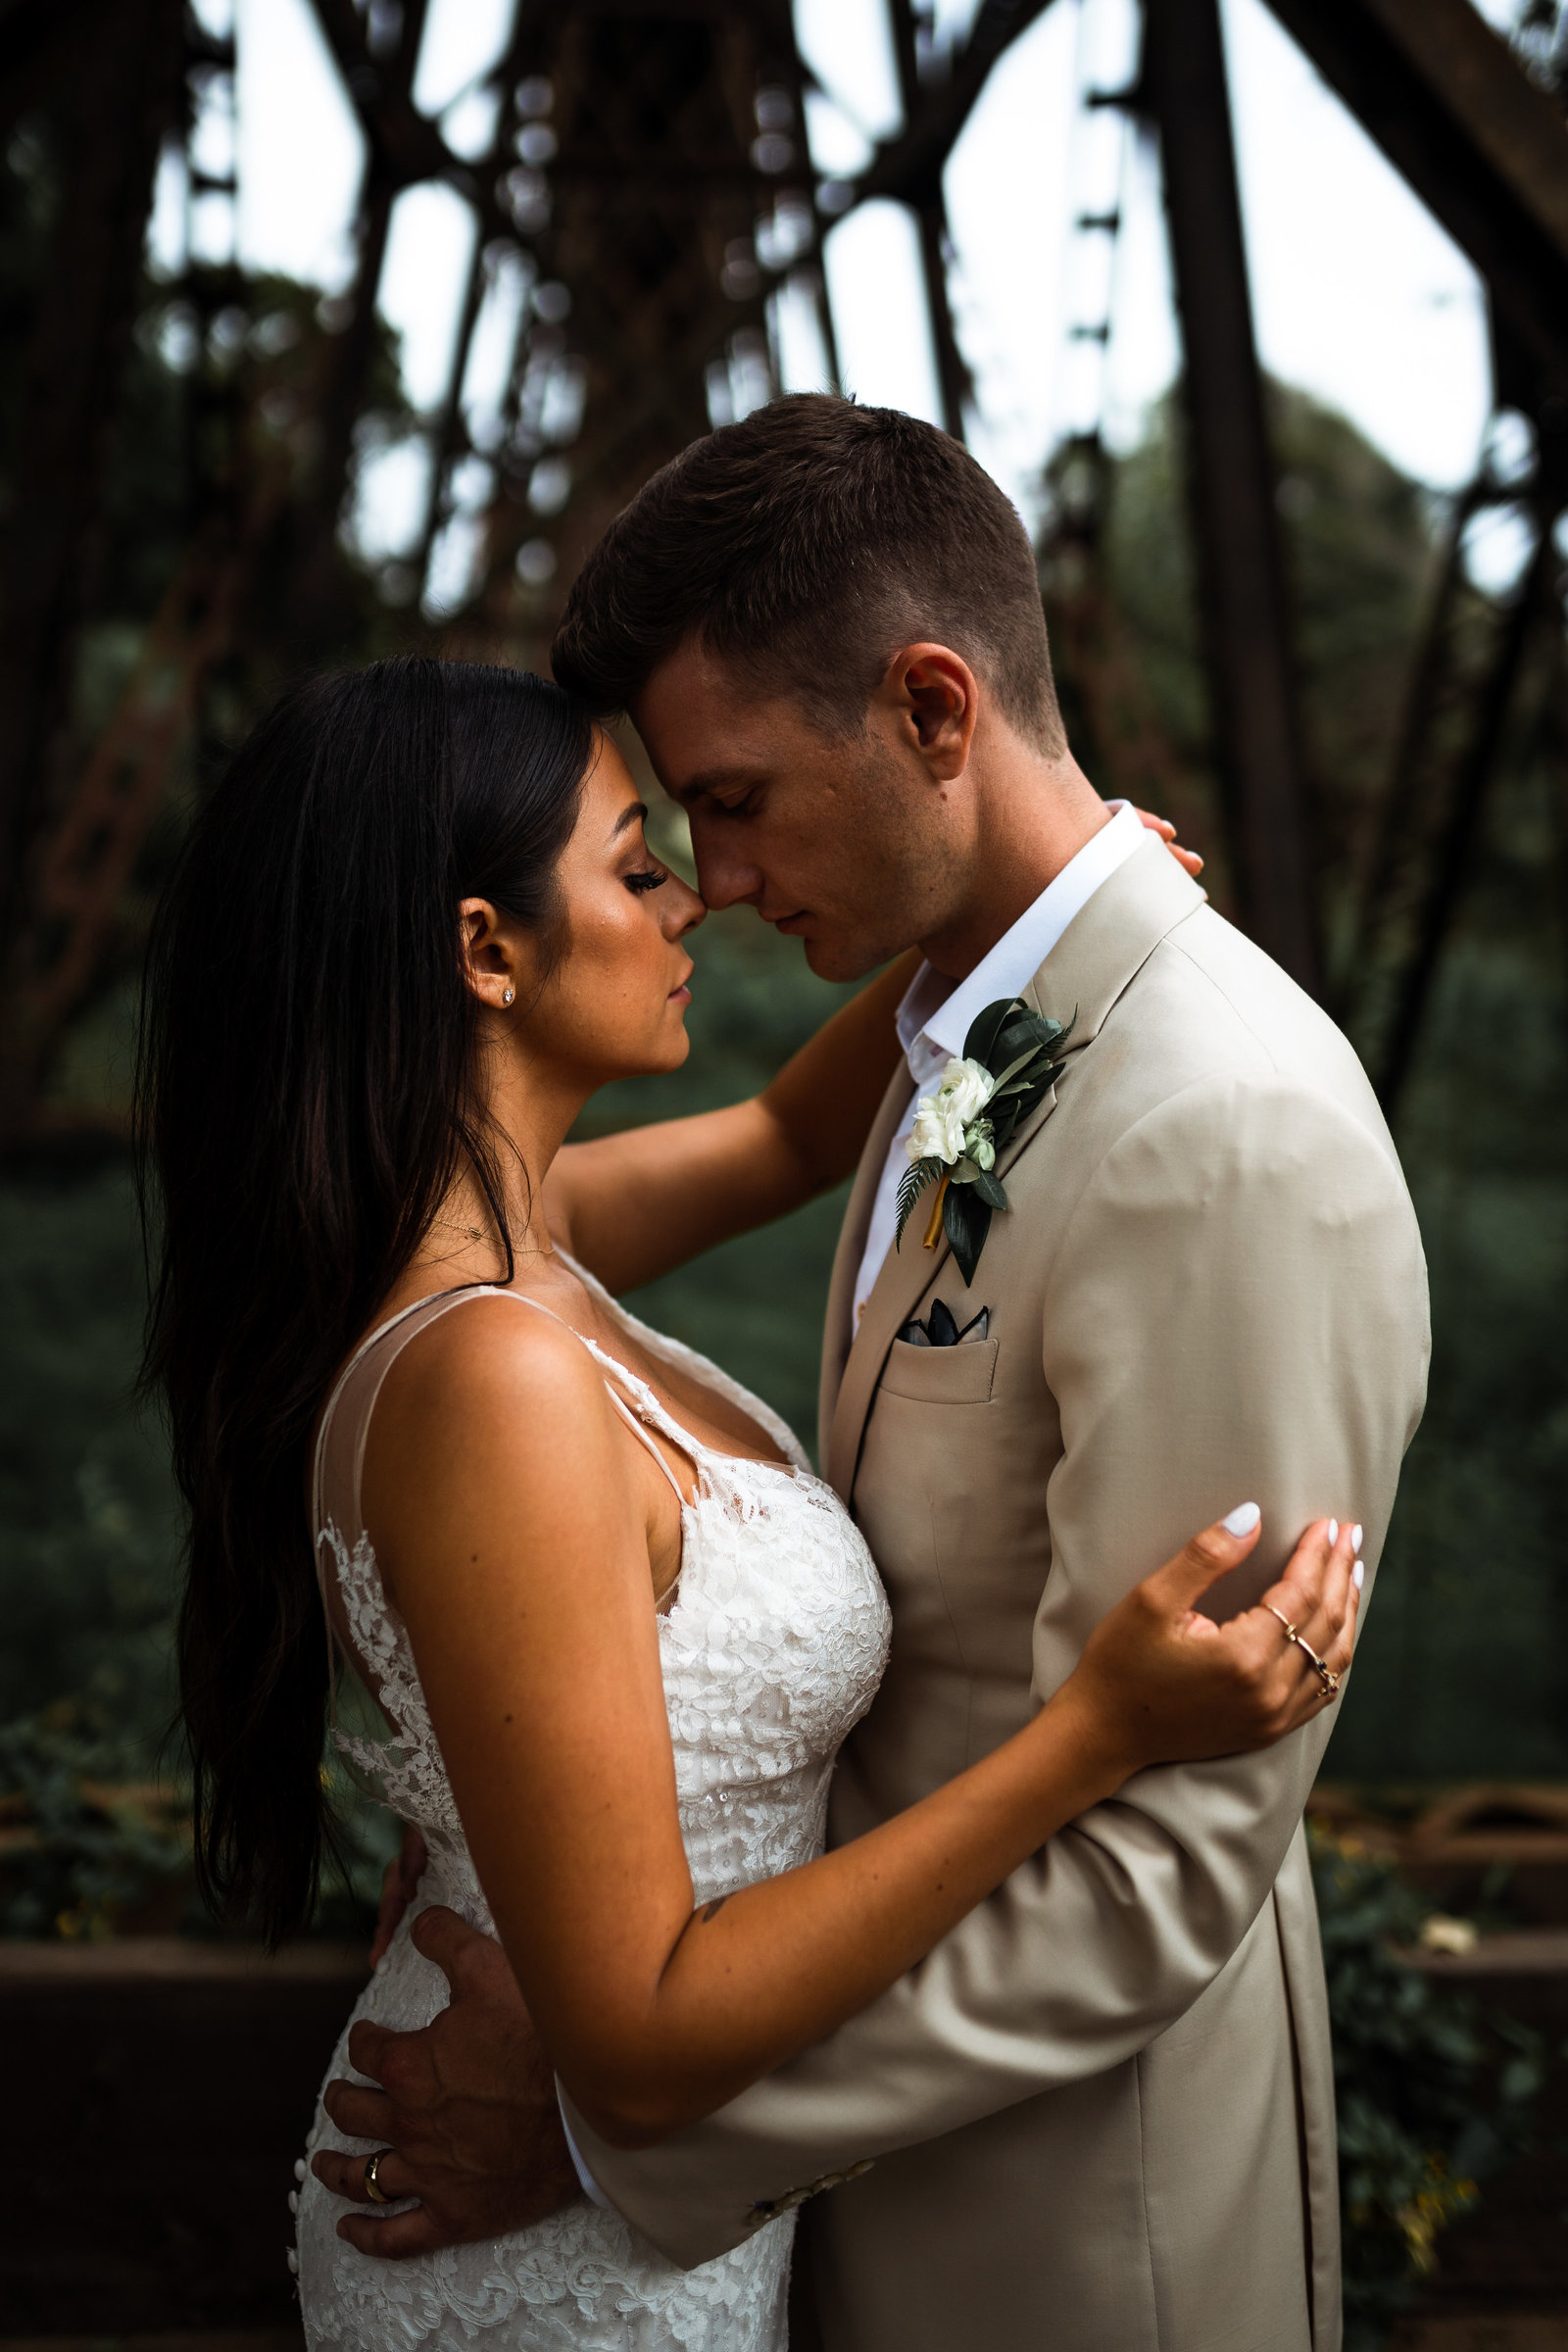 Wedding couple holding each other very intimately, with noses touching and eyes closed with serious facial expressions.